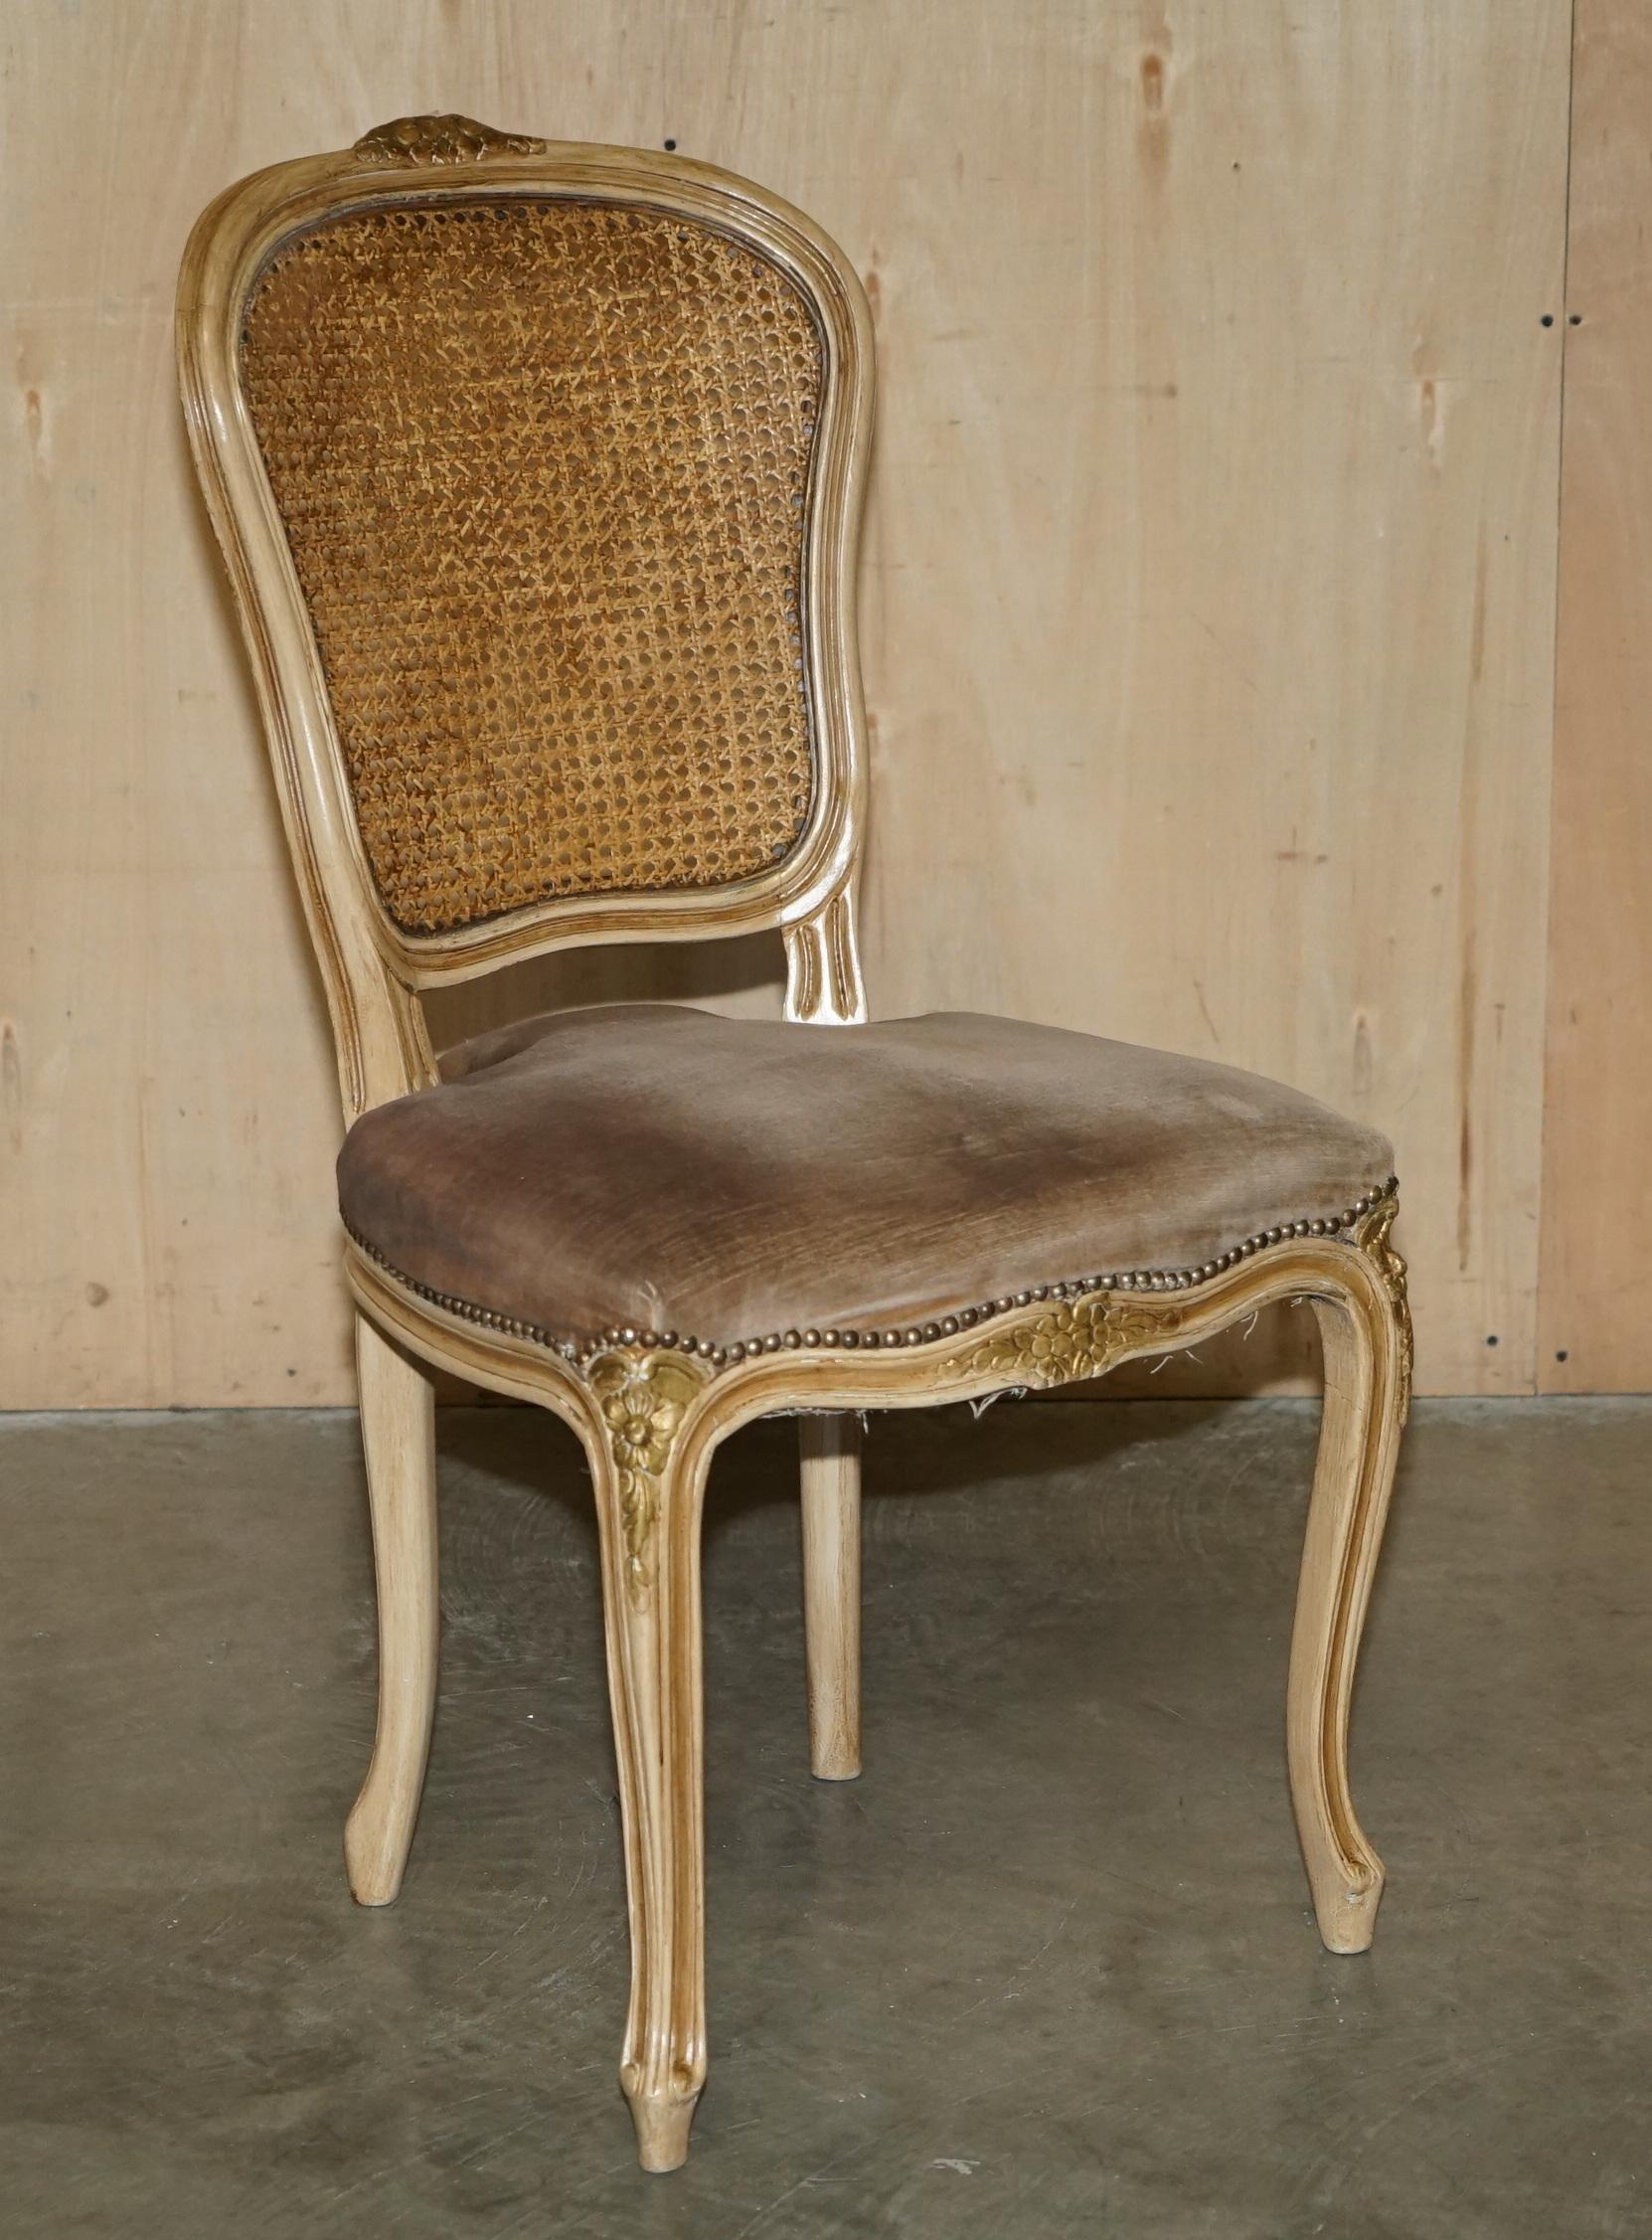 FOUR FINE ANTIQUE FRENCH BERGERE DiNING CHAIRS WITH PERIOD VELOUR UPHOLSTERY For Sale 3